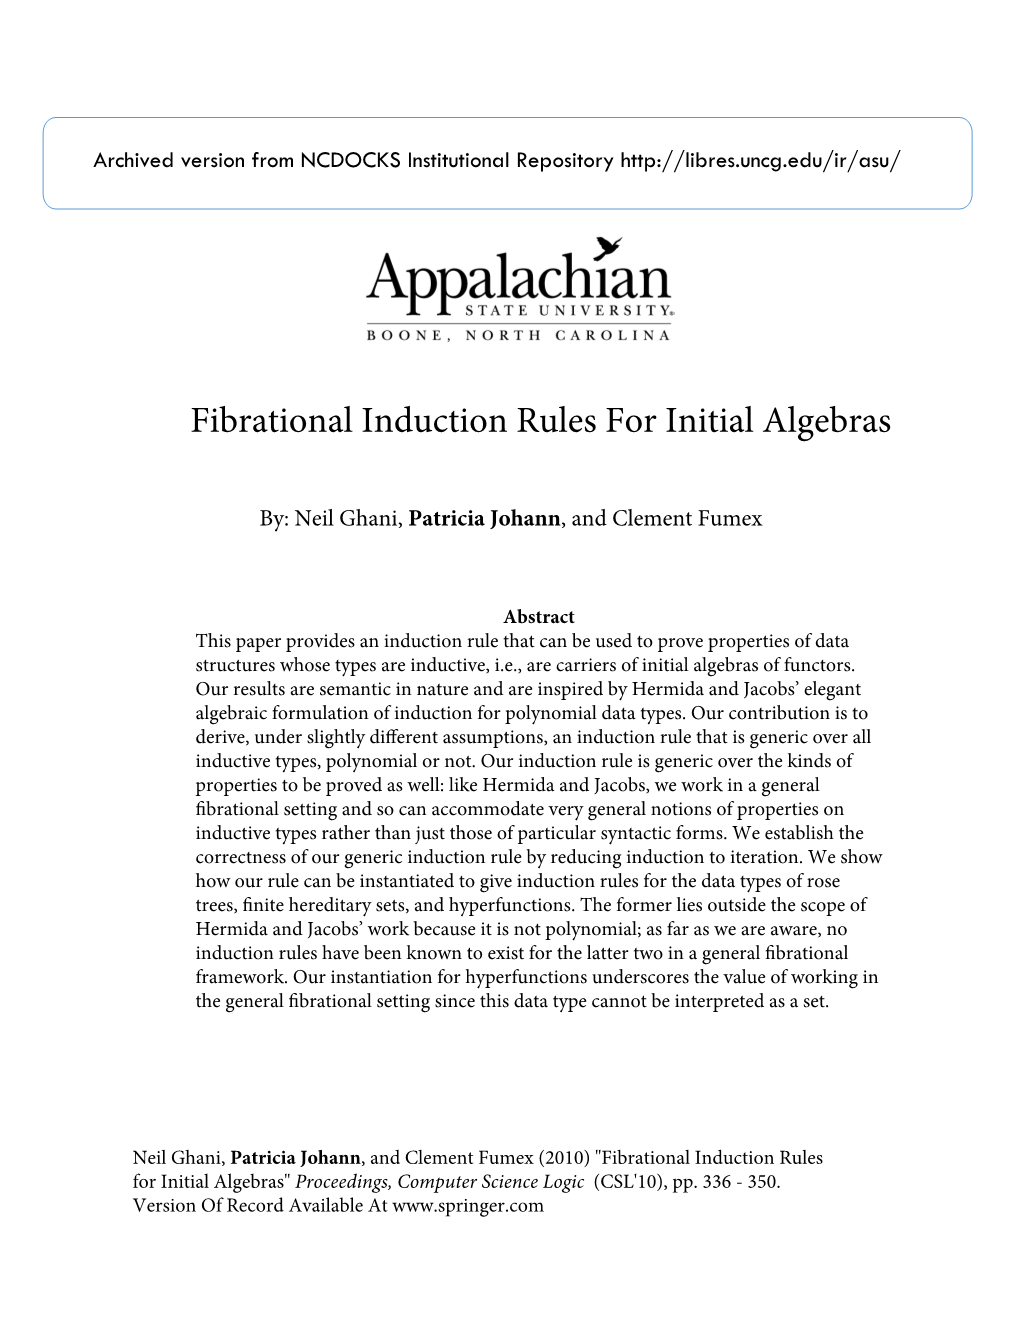 Fibrational Induction Rules for Initial Algebras